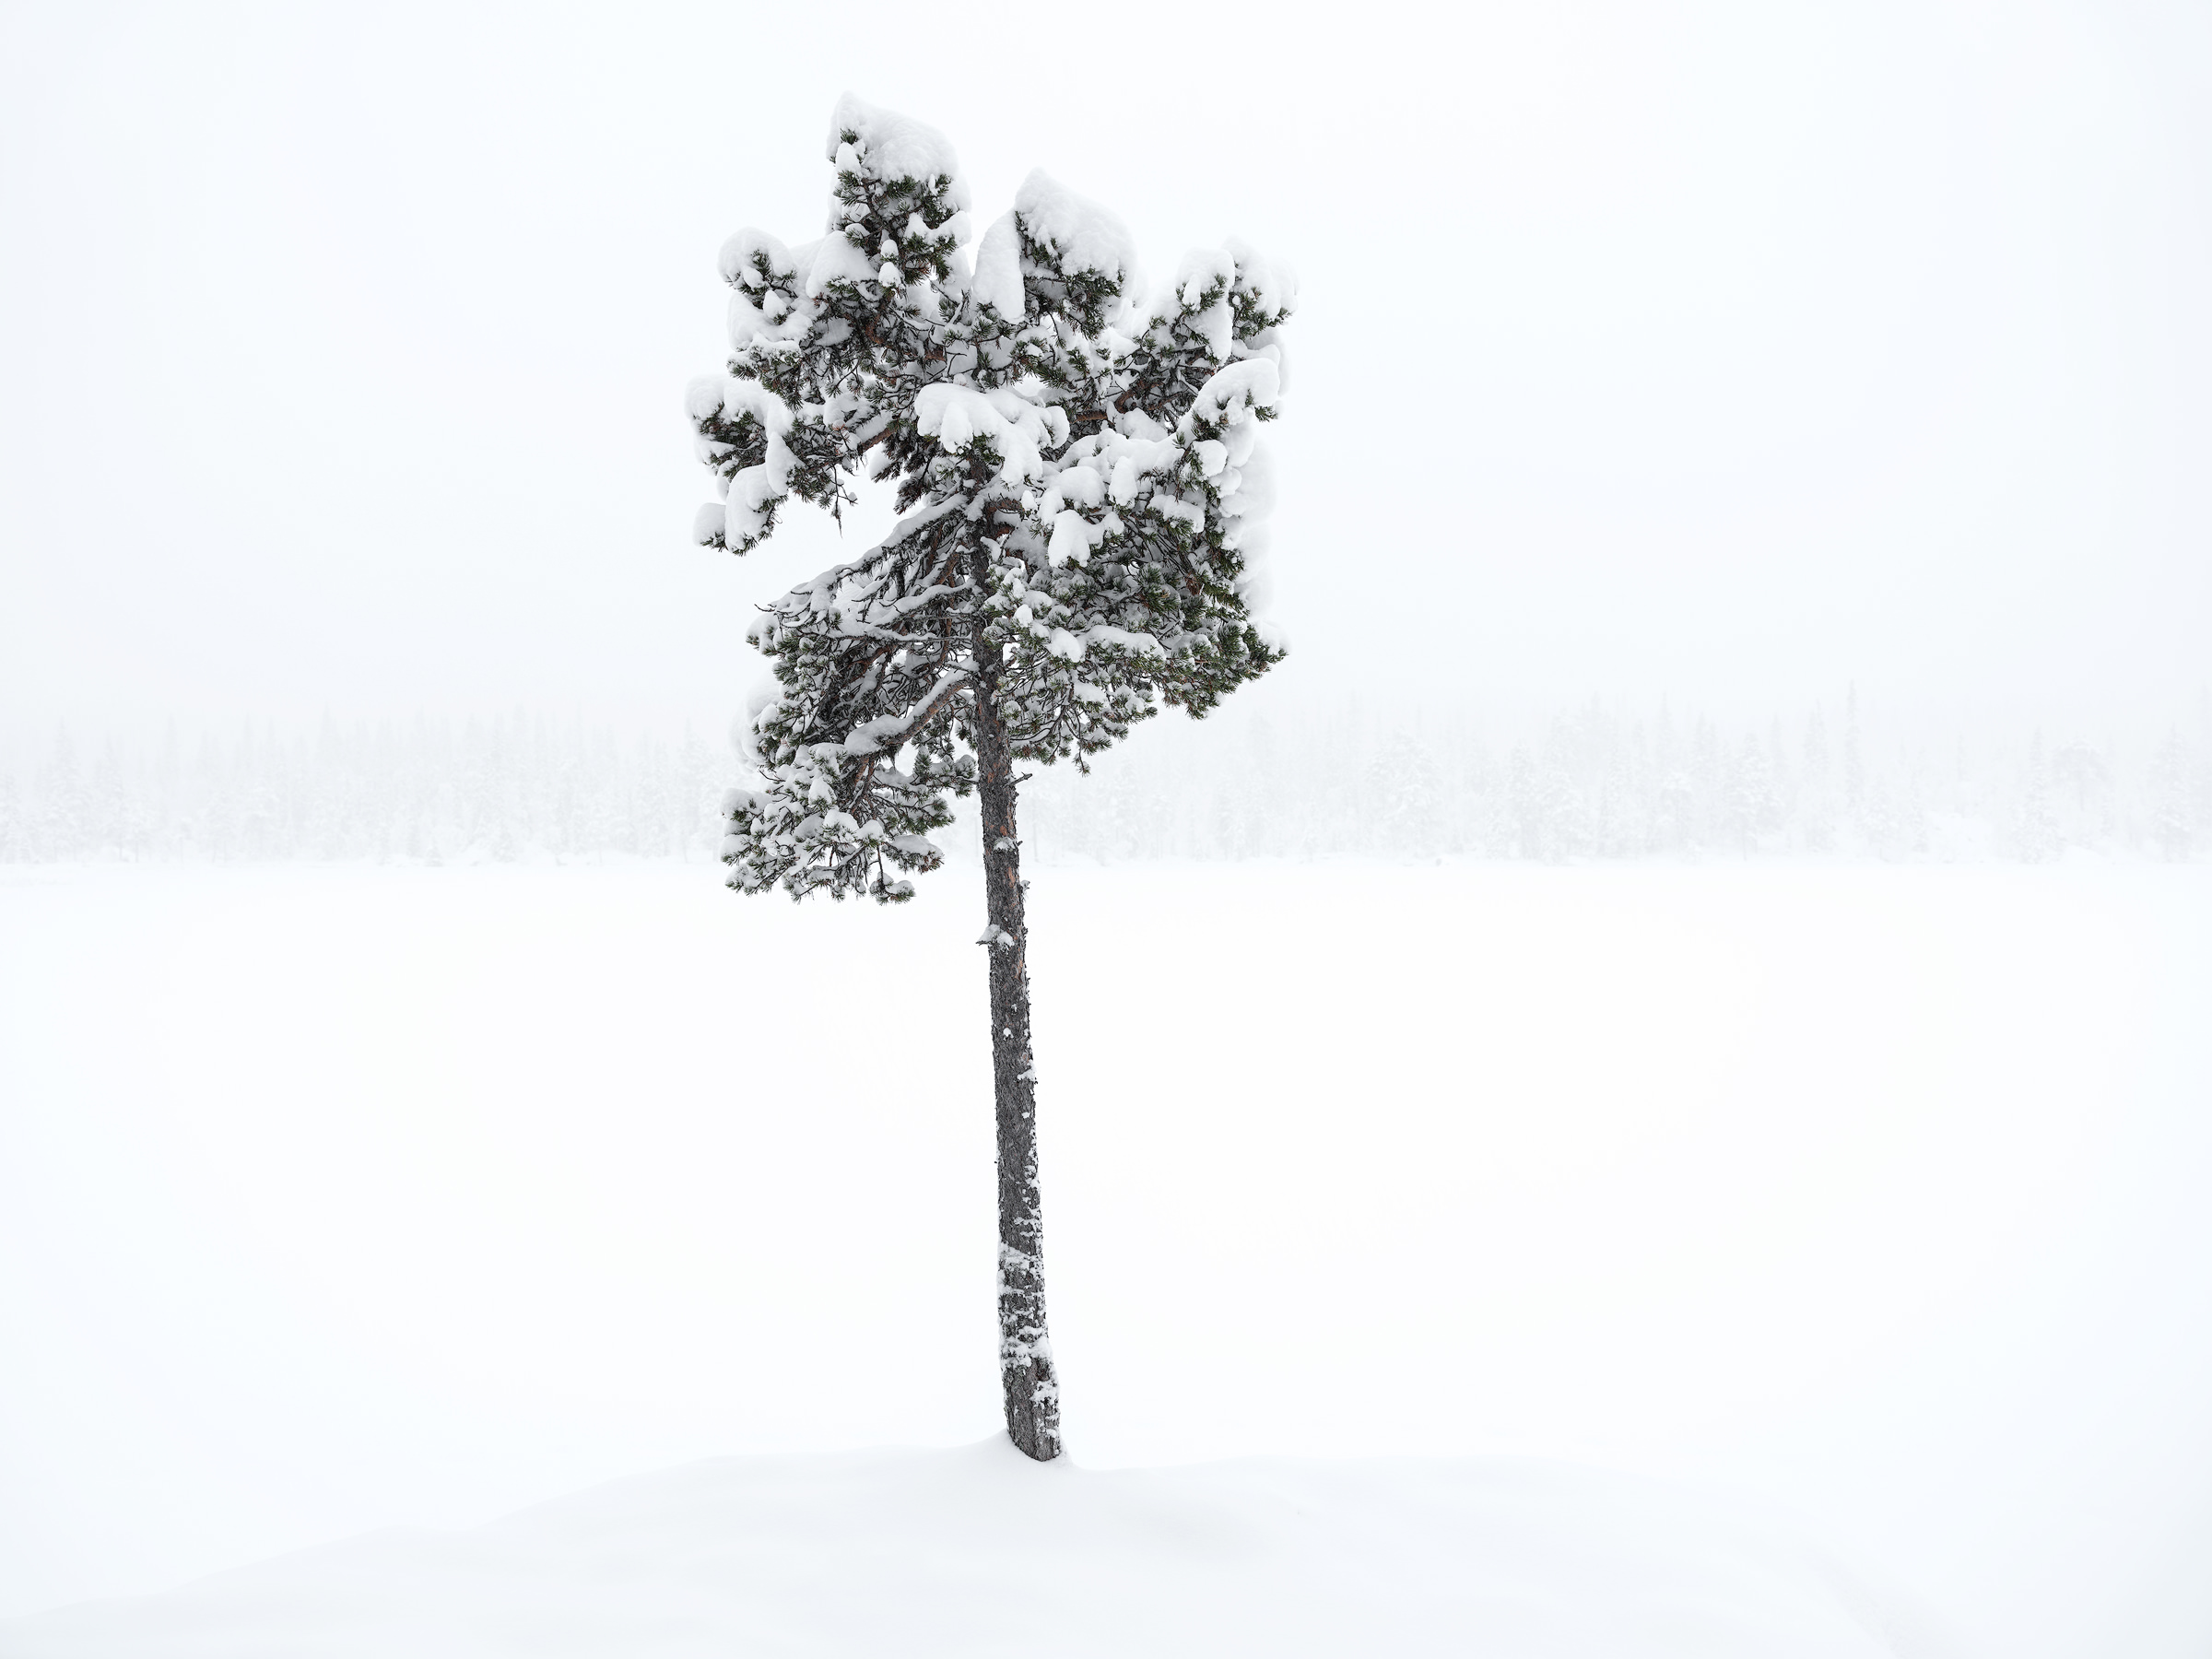 A lone pine in the snowfall in the old growth forest of Hotagen, Jämtland.